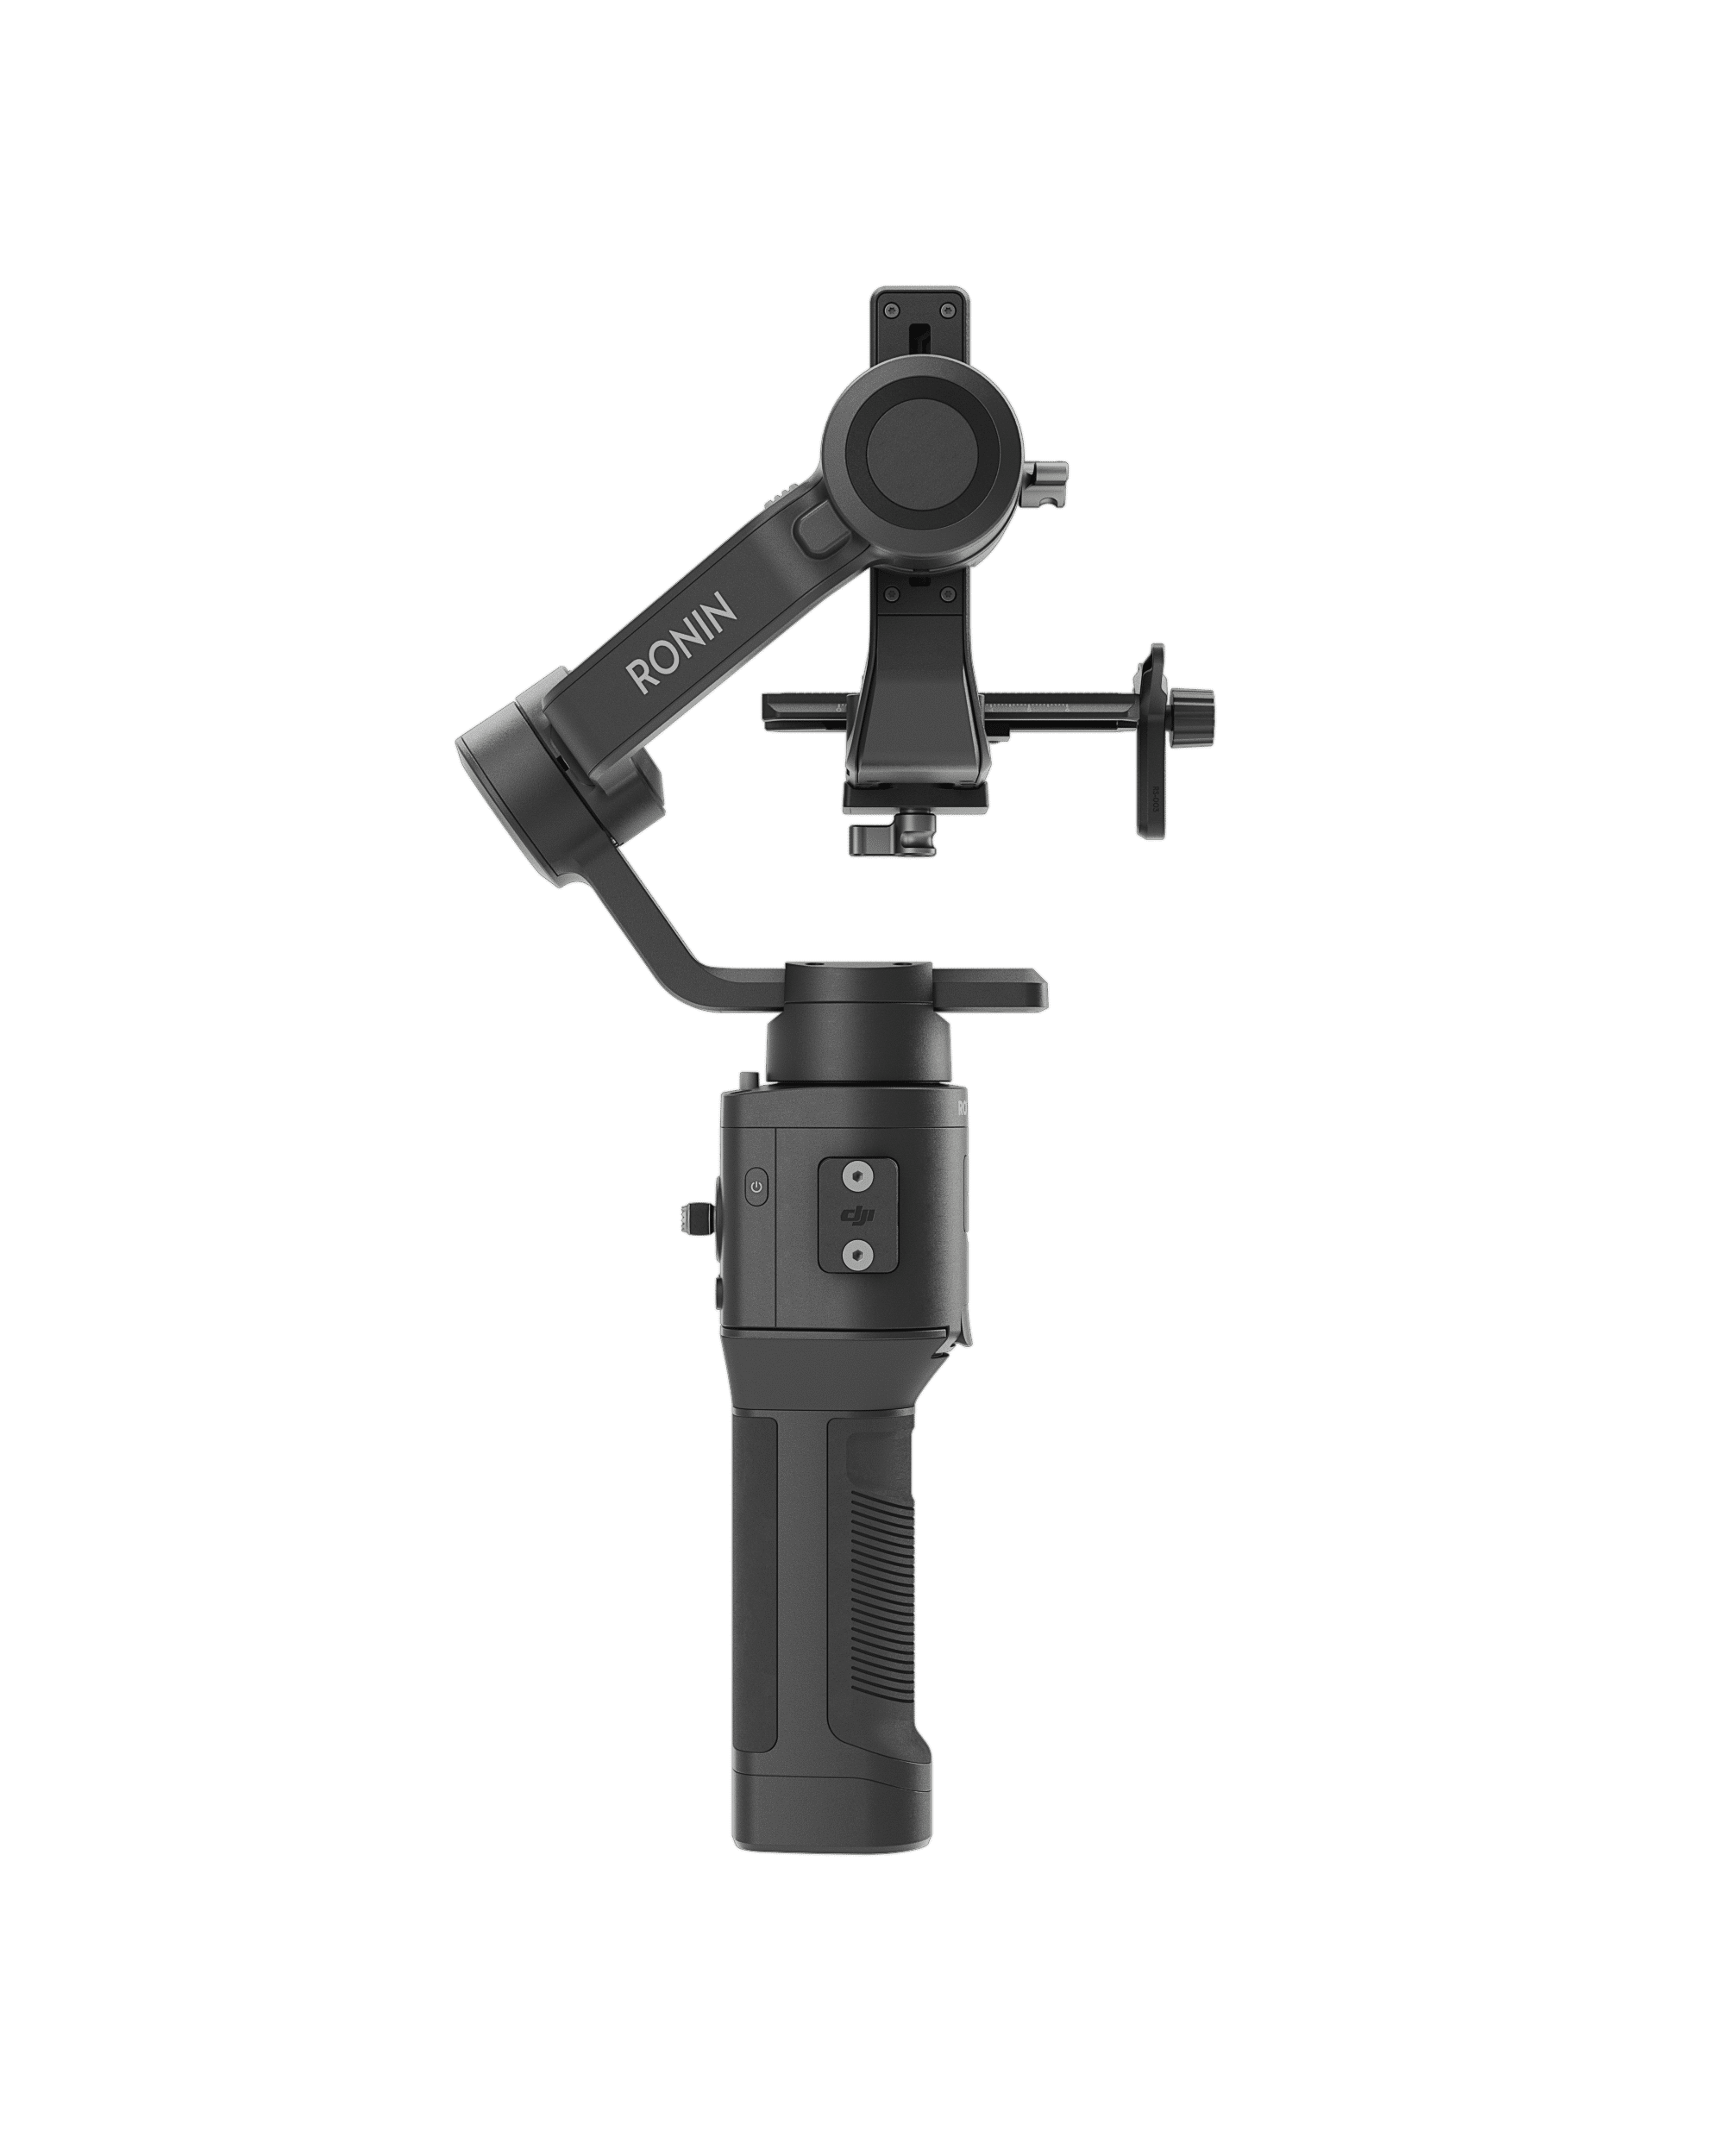  DJI RS 3, 3-Axis Gimbal for DSLR and Mirrorless Camera  Canon/Sony/Panasonic/Nikon/Fujifilm, 3 kg (6.6 lbs) Payload, Automated Axis  Locks, 1.8 OLED Touchscreen, Professional Camera Stabilizer : Electronics